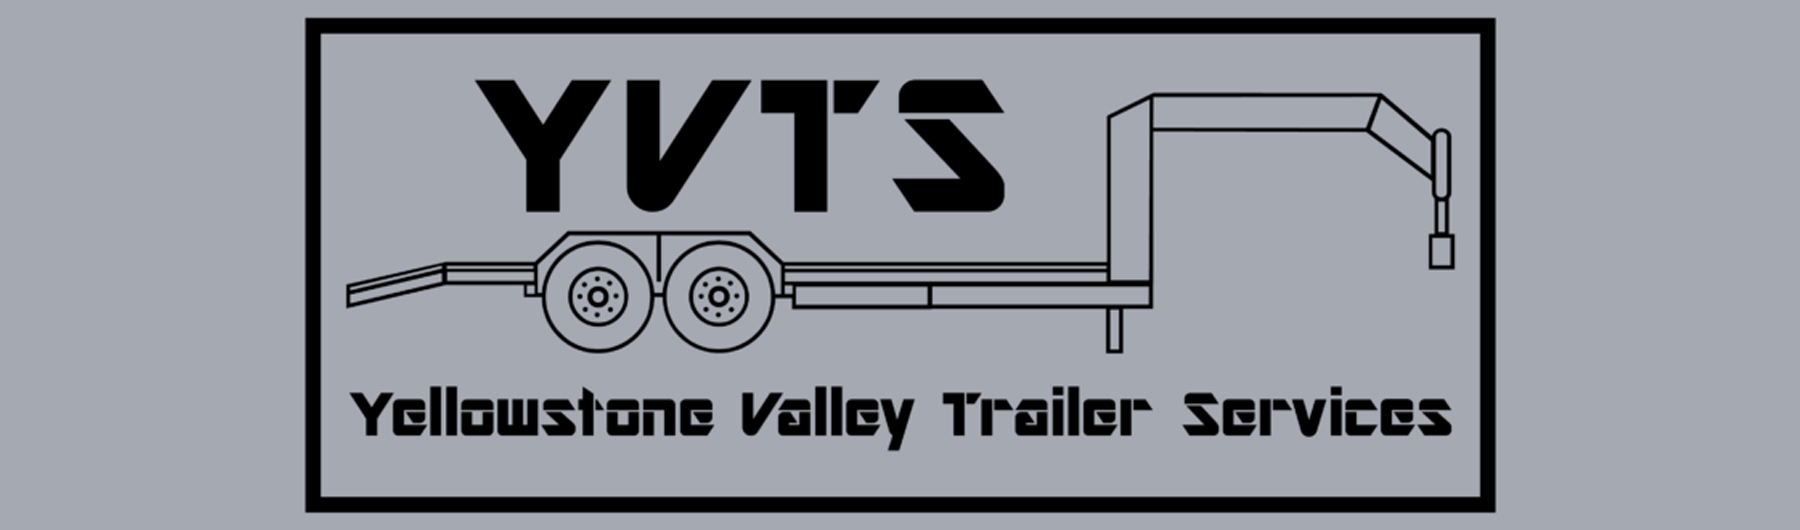 Yellowstone Valley Trailer Services